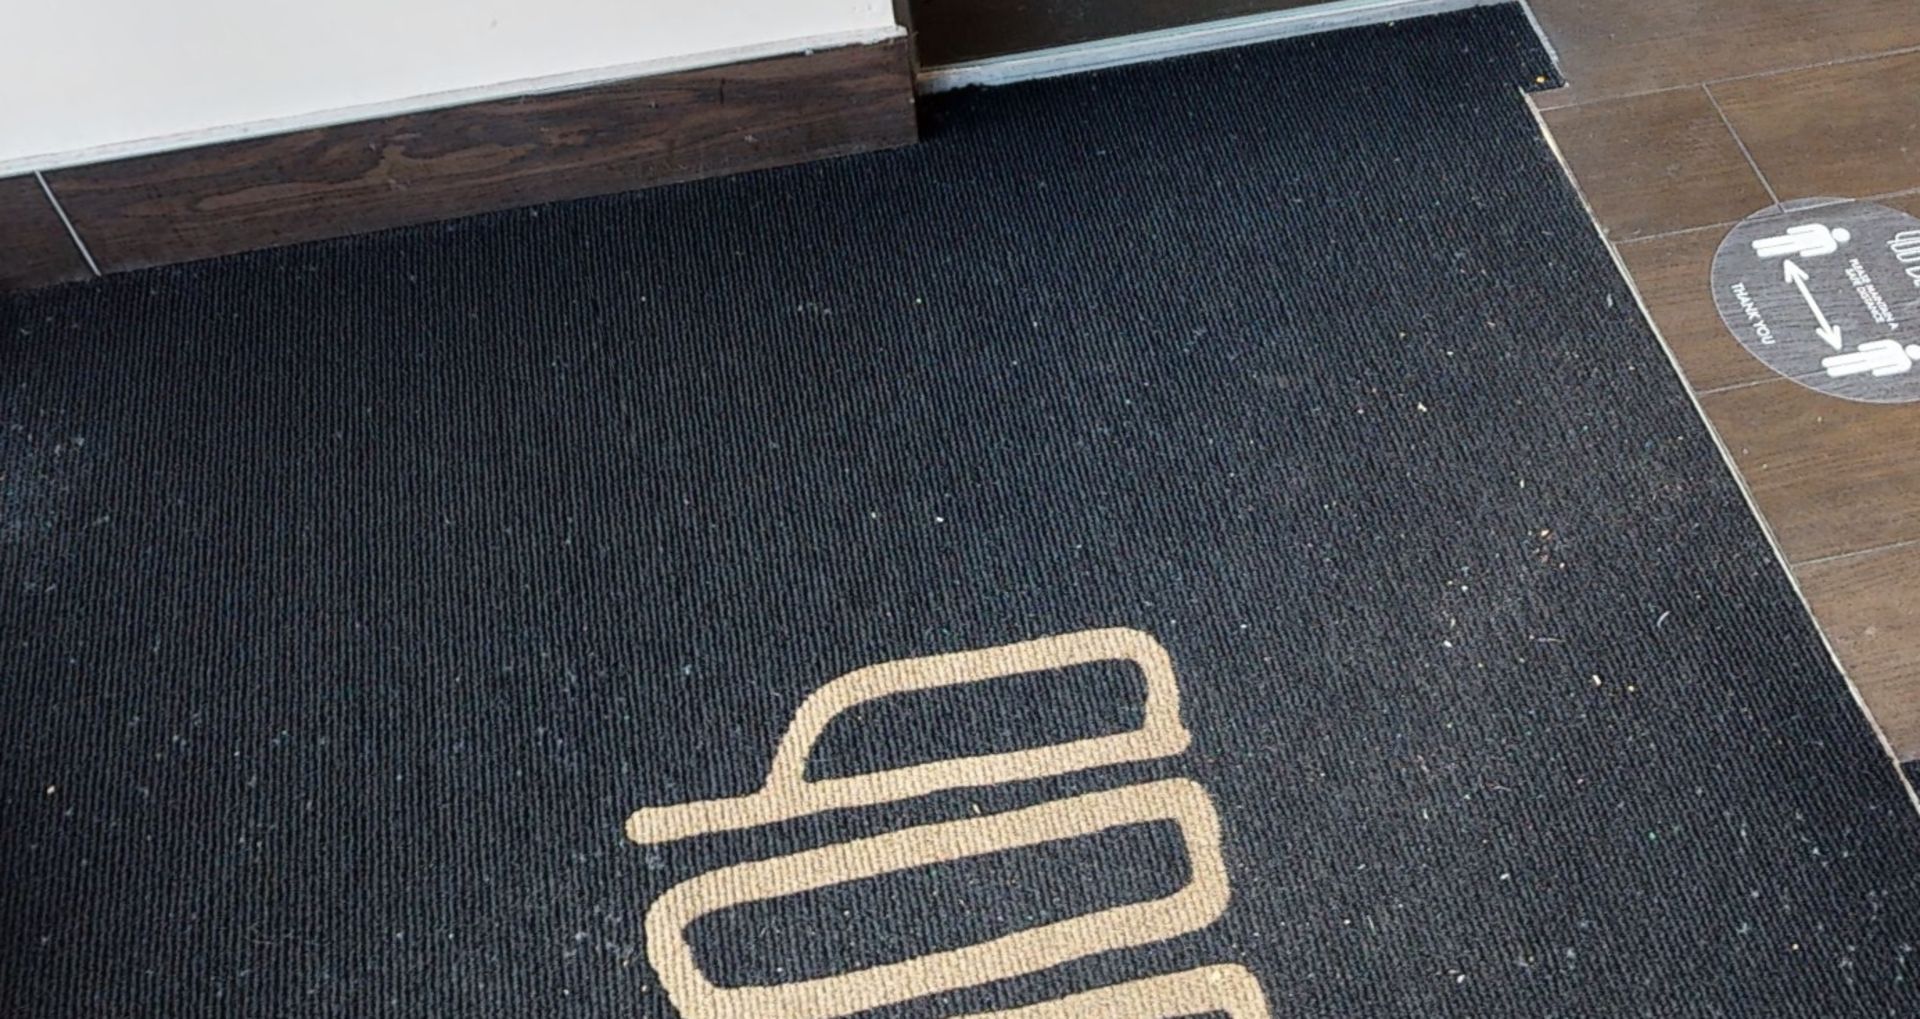 1 x Commercial Entry Anti-Slip Entrance Mat - Size Approx 310 x 160 cms - CL701 - Location: Ashton - Image 2 of 4